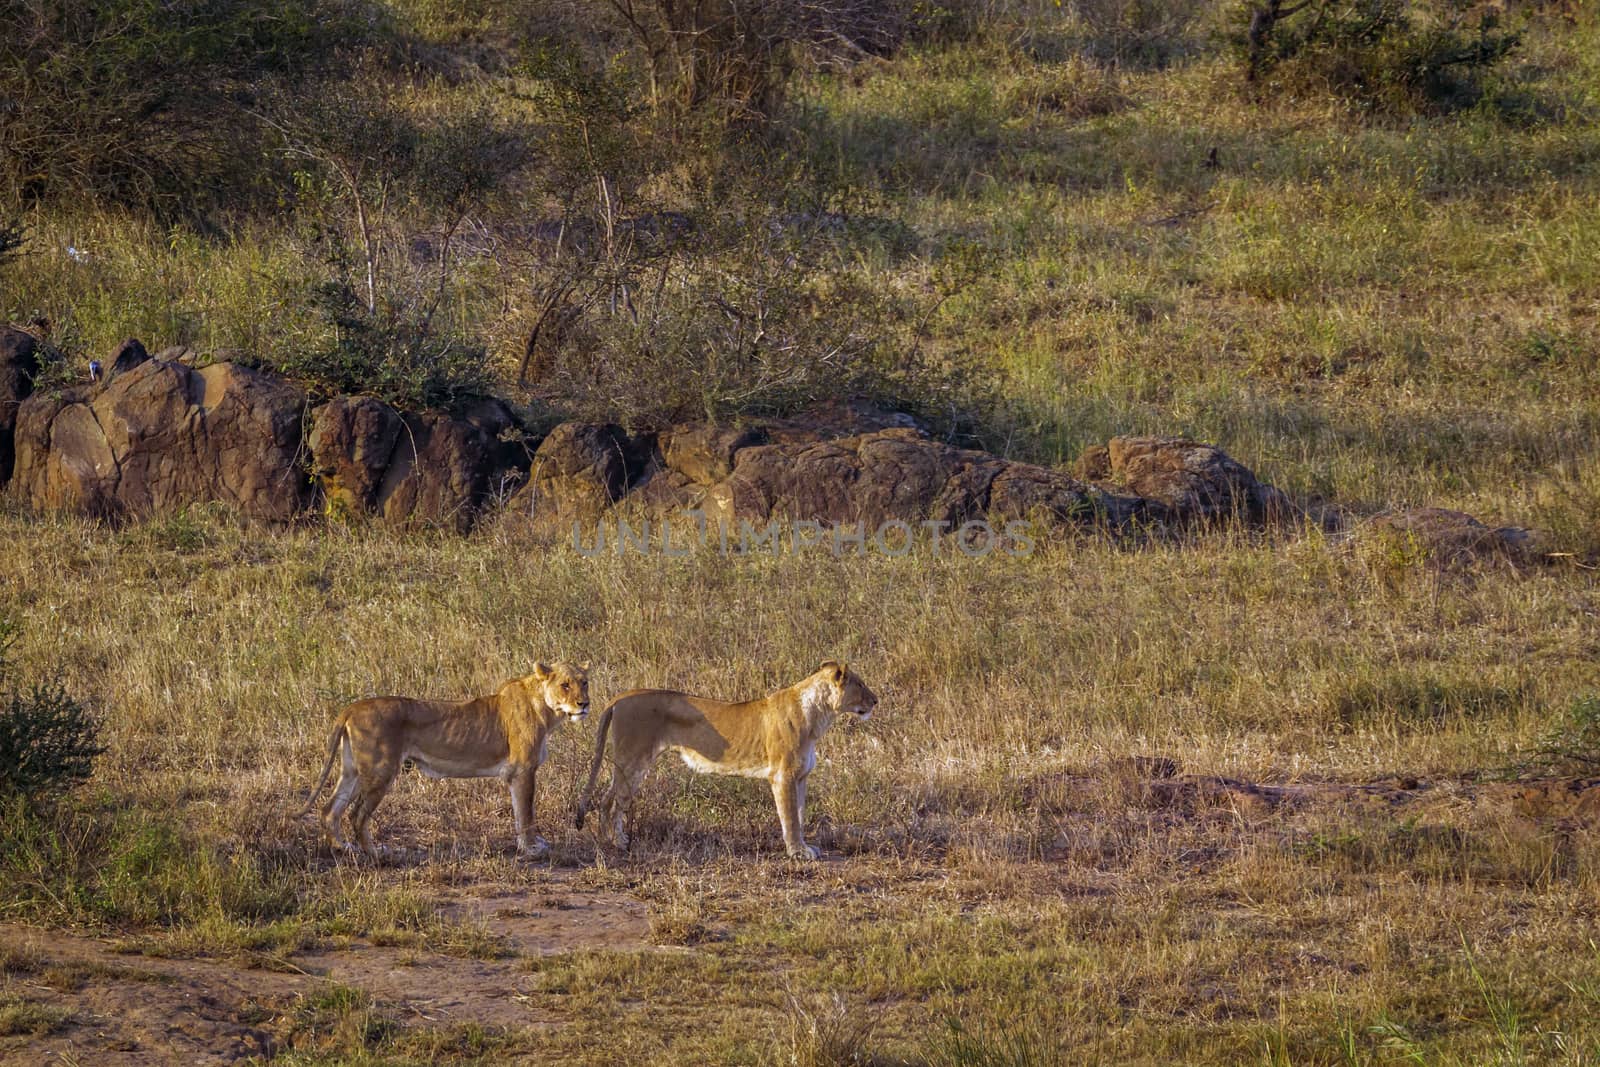 Two African lioness on the move in Kruger National park, South Africa ; Specie Panthera leo family of Felidae